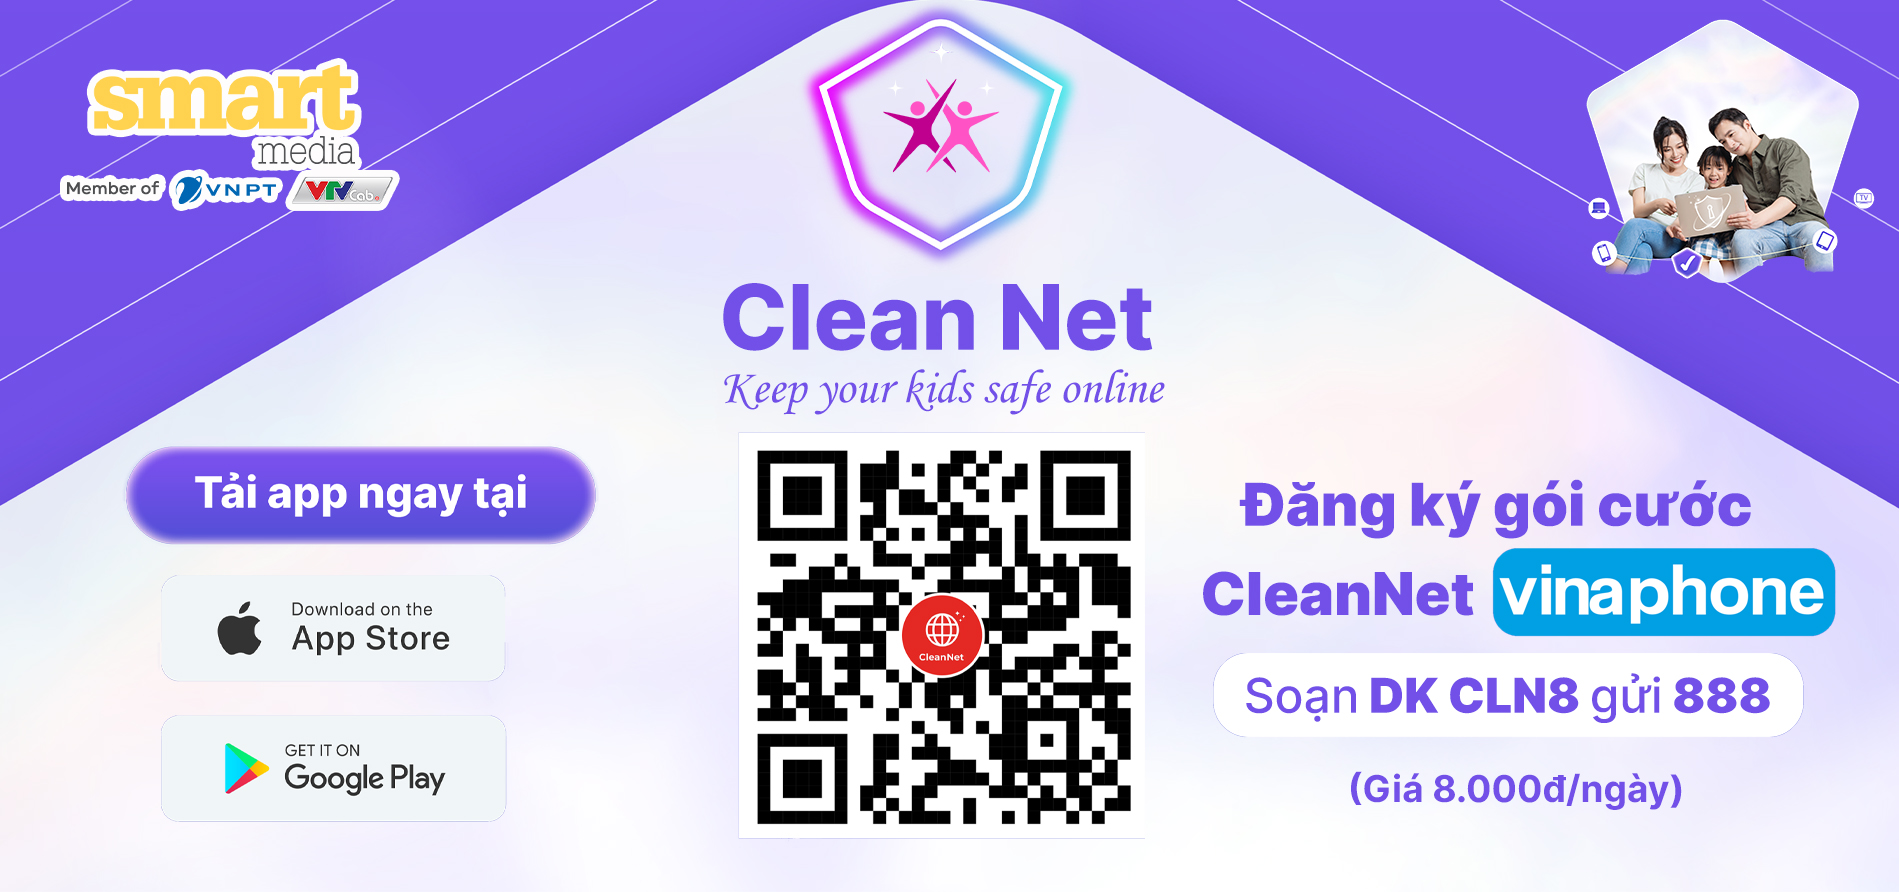 CleaNet